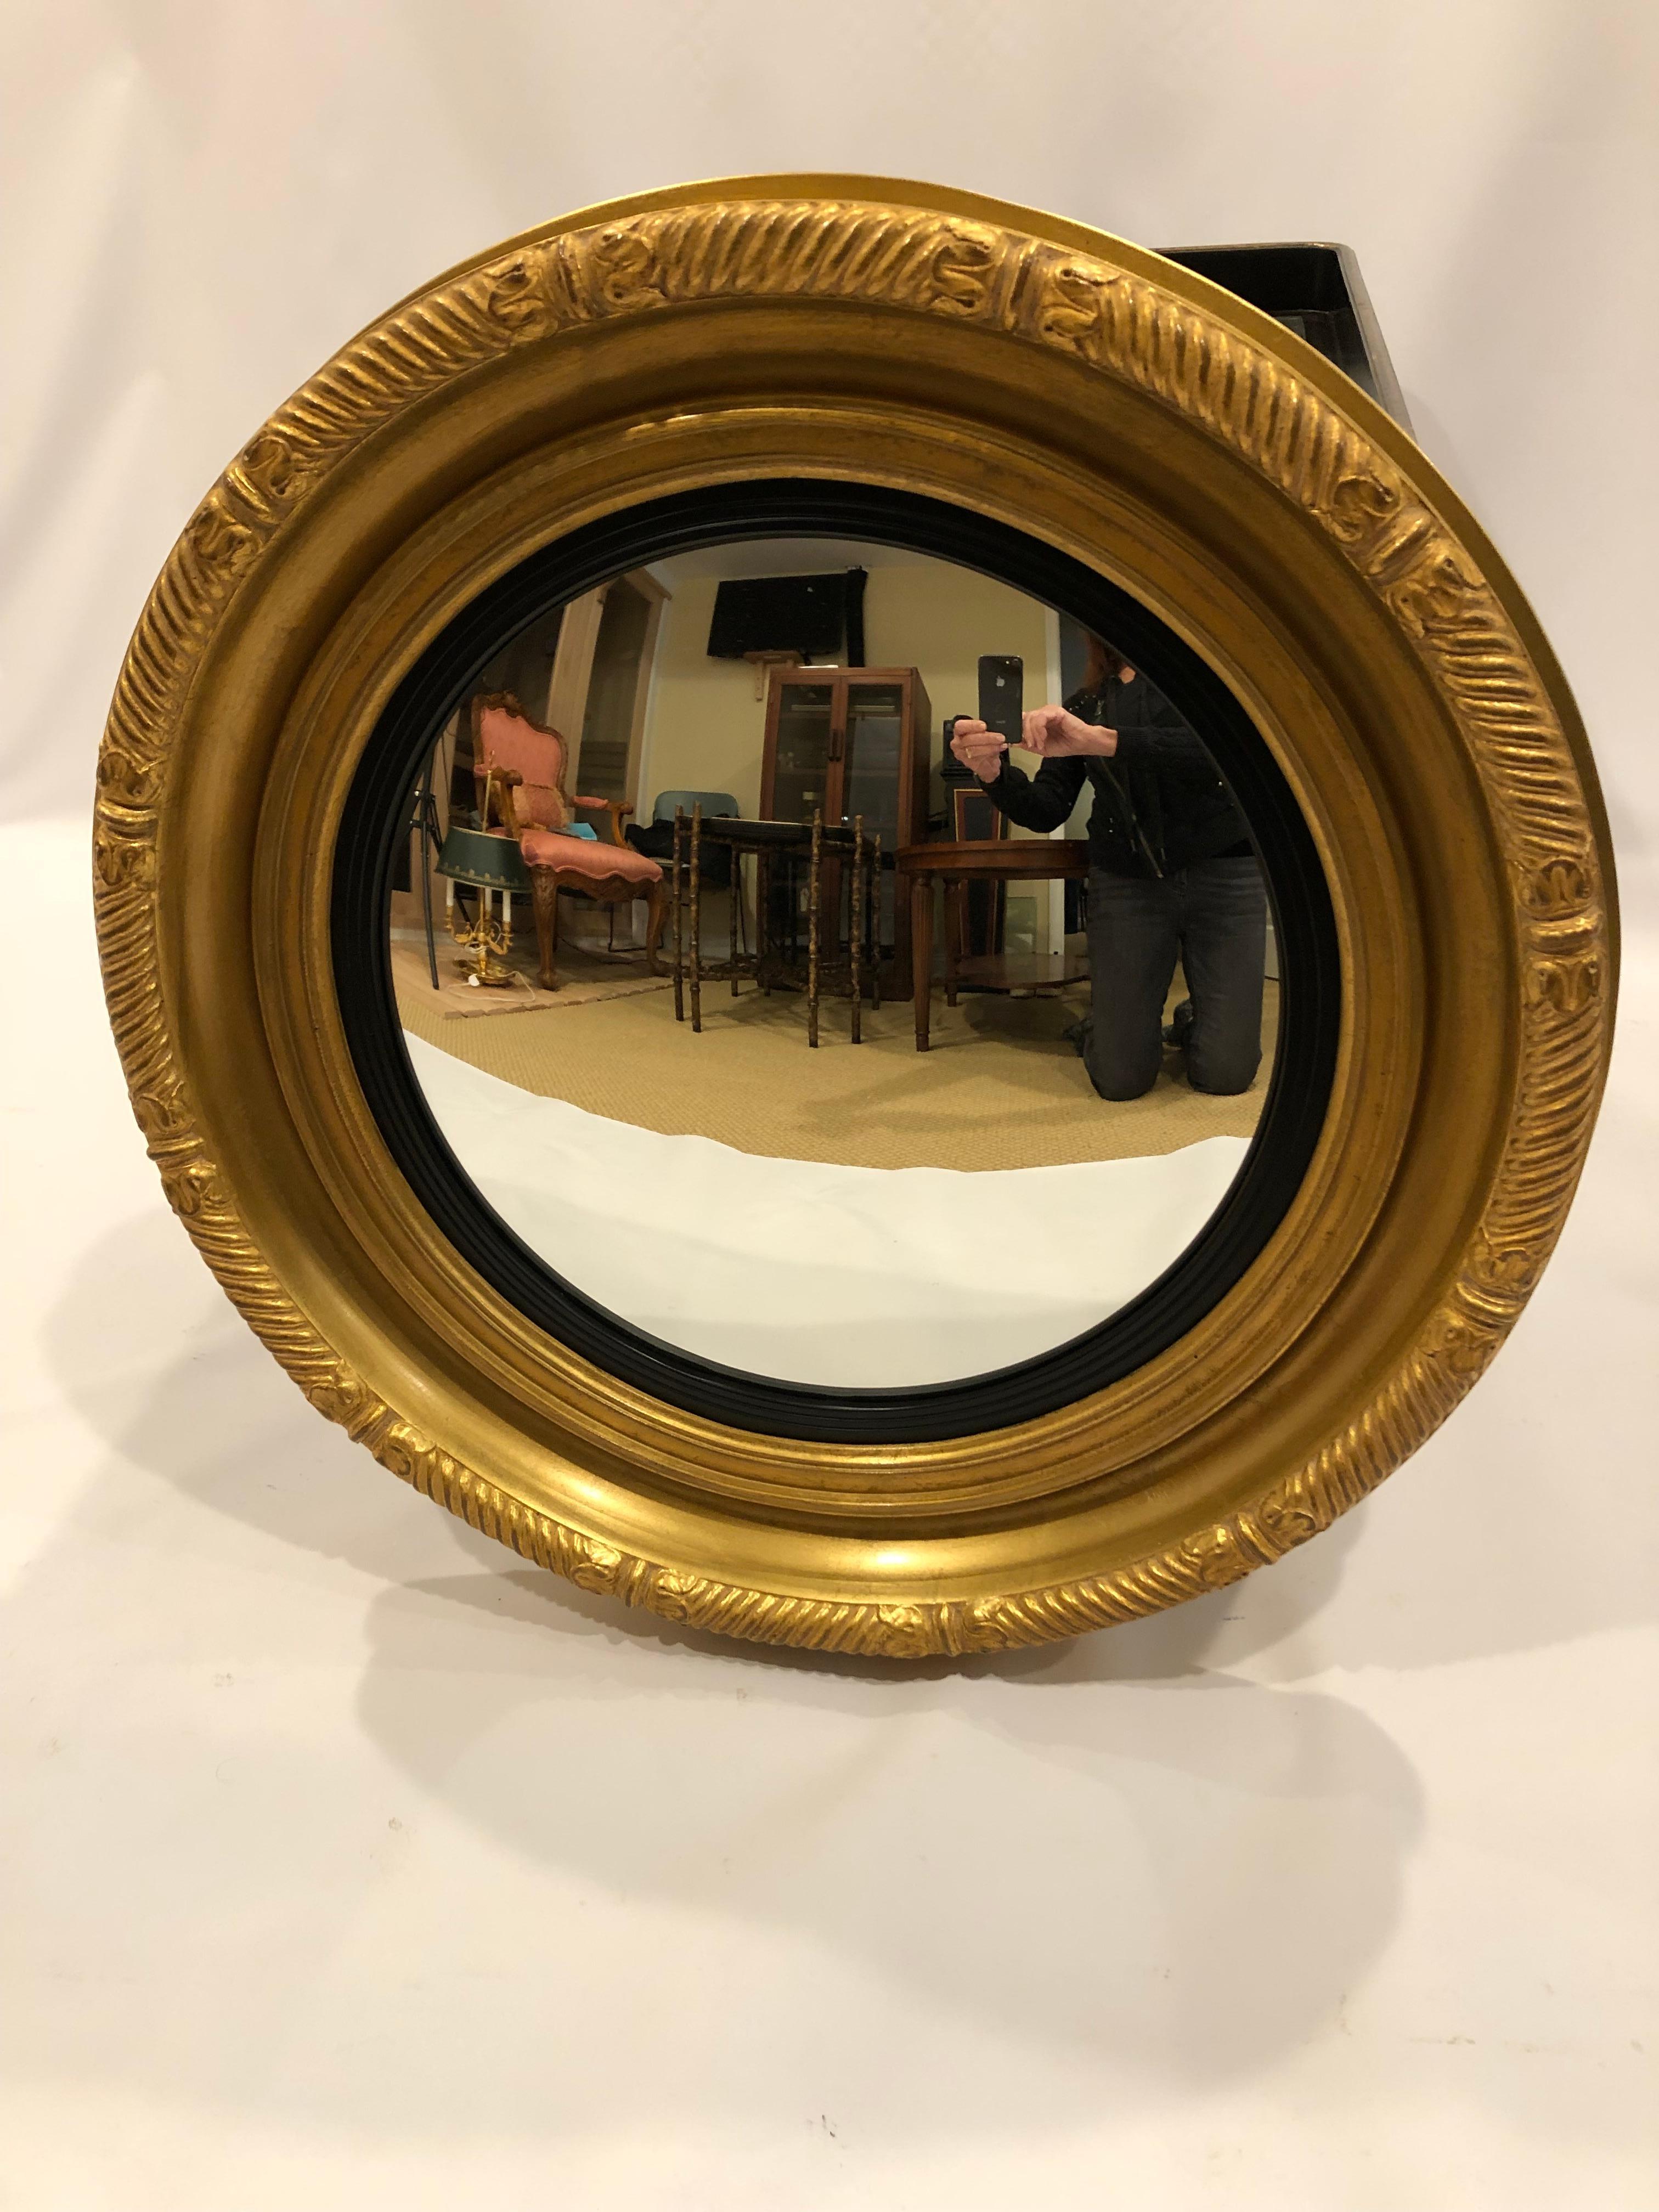 Classic round bullseye convex mirror by Carvers Guild having giltwood frame and contrasting black interior border. Measure: Mirror is 15.75 diameter.